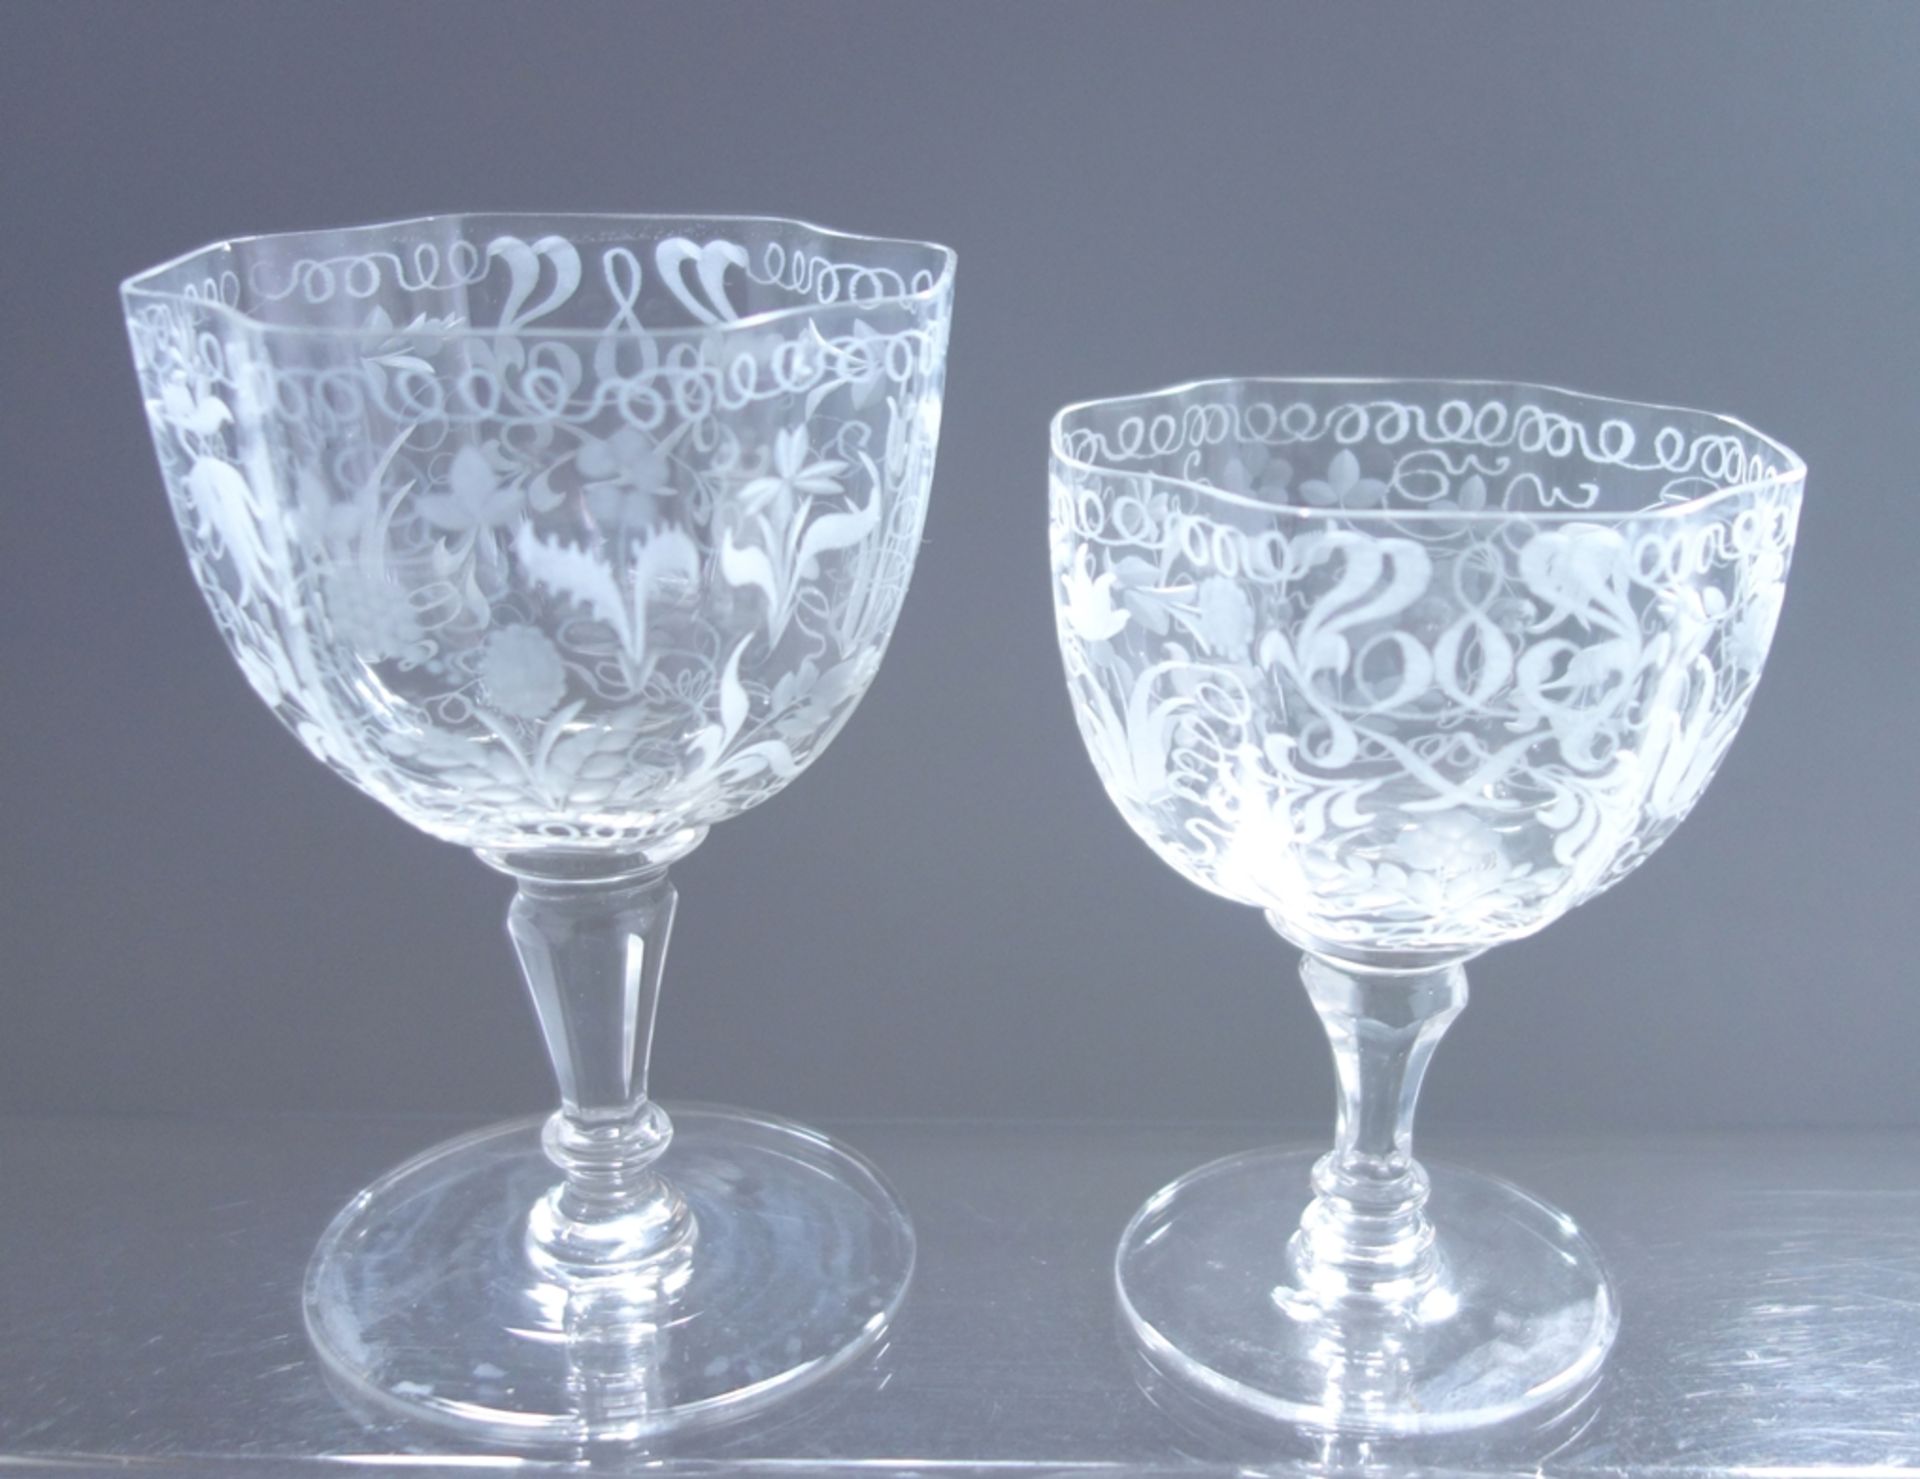 21 high quality wine glasses with delicate floral engraving, 1st half 20th c. - Image 2 of 5